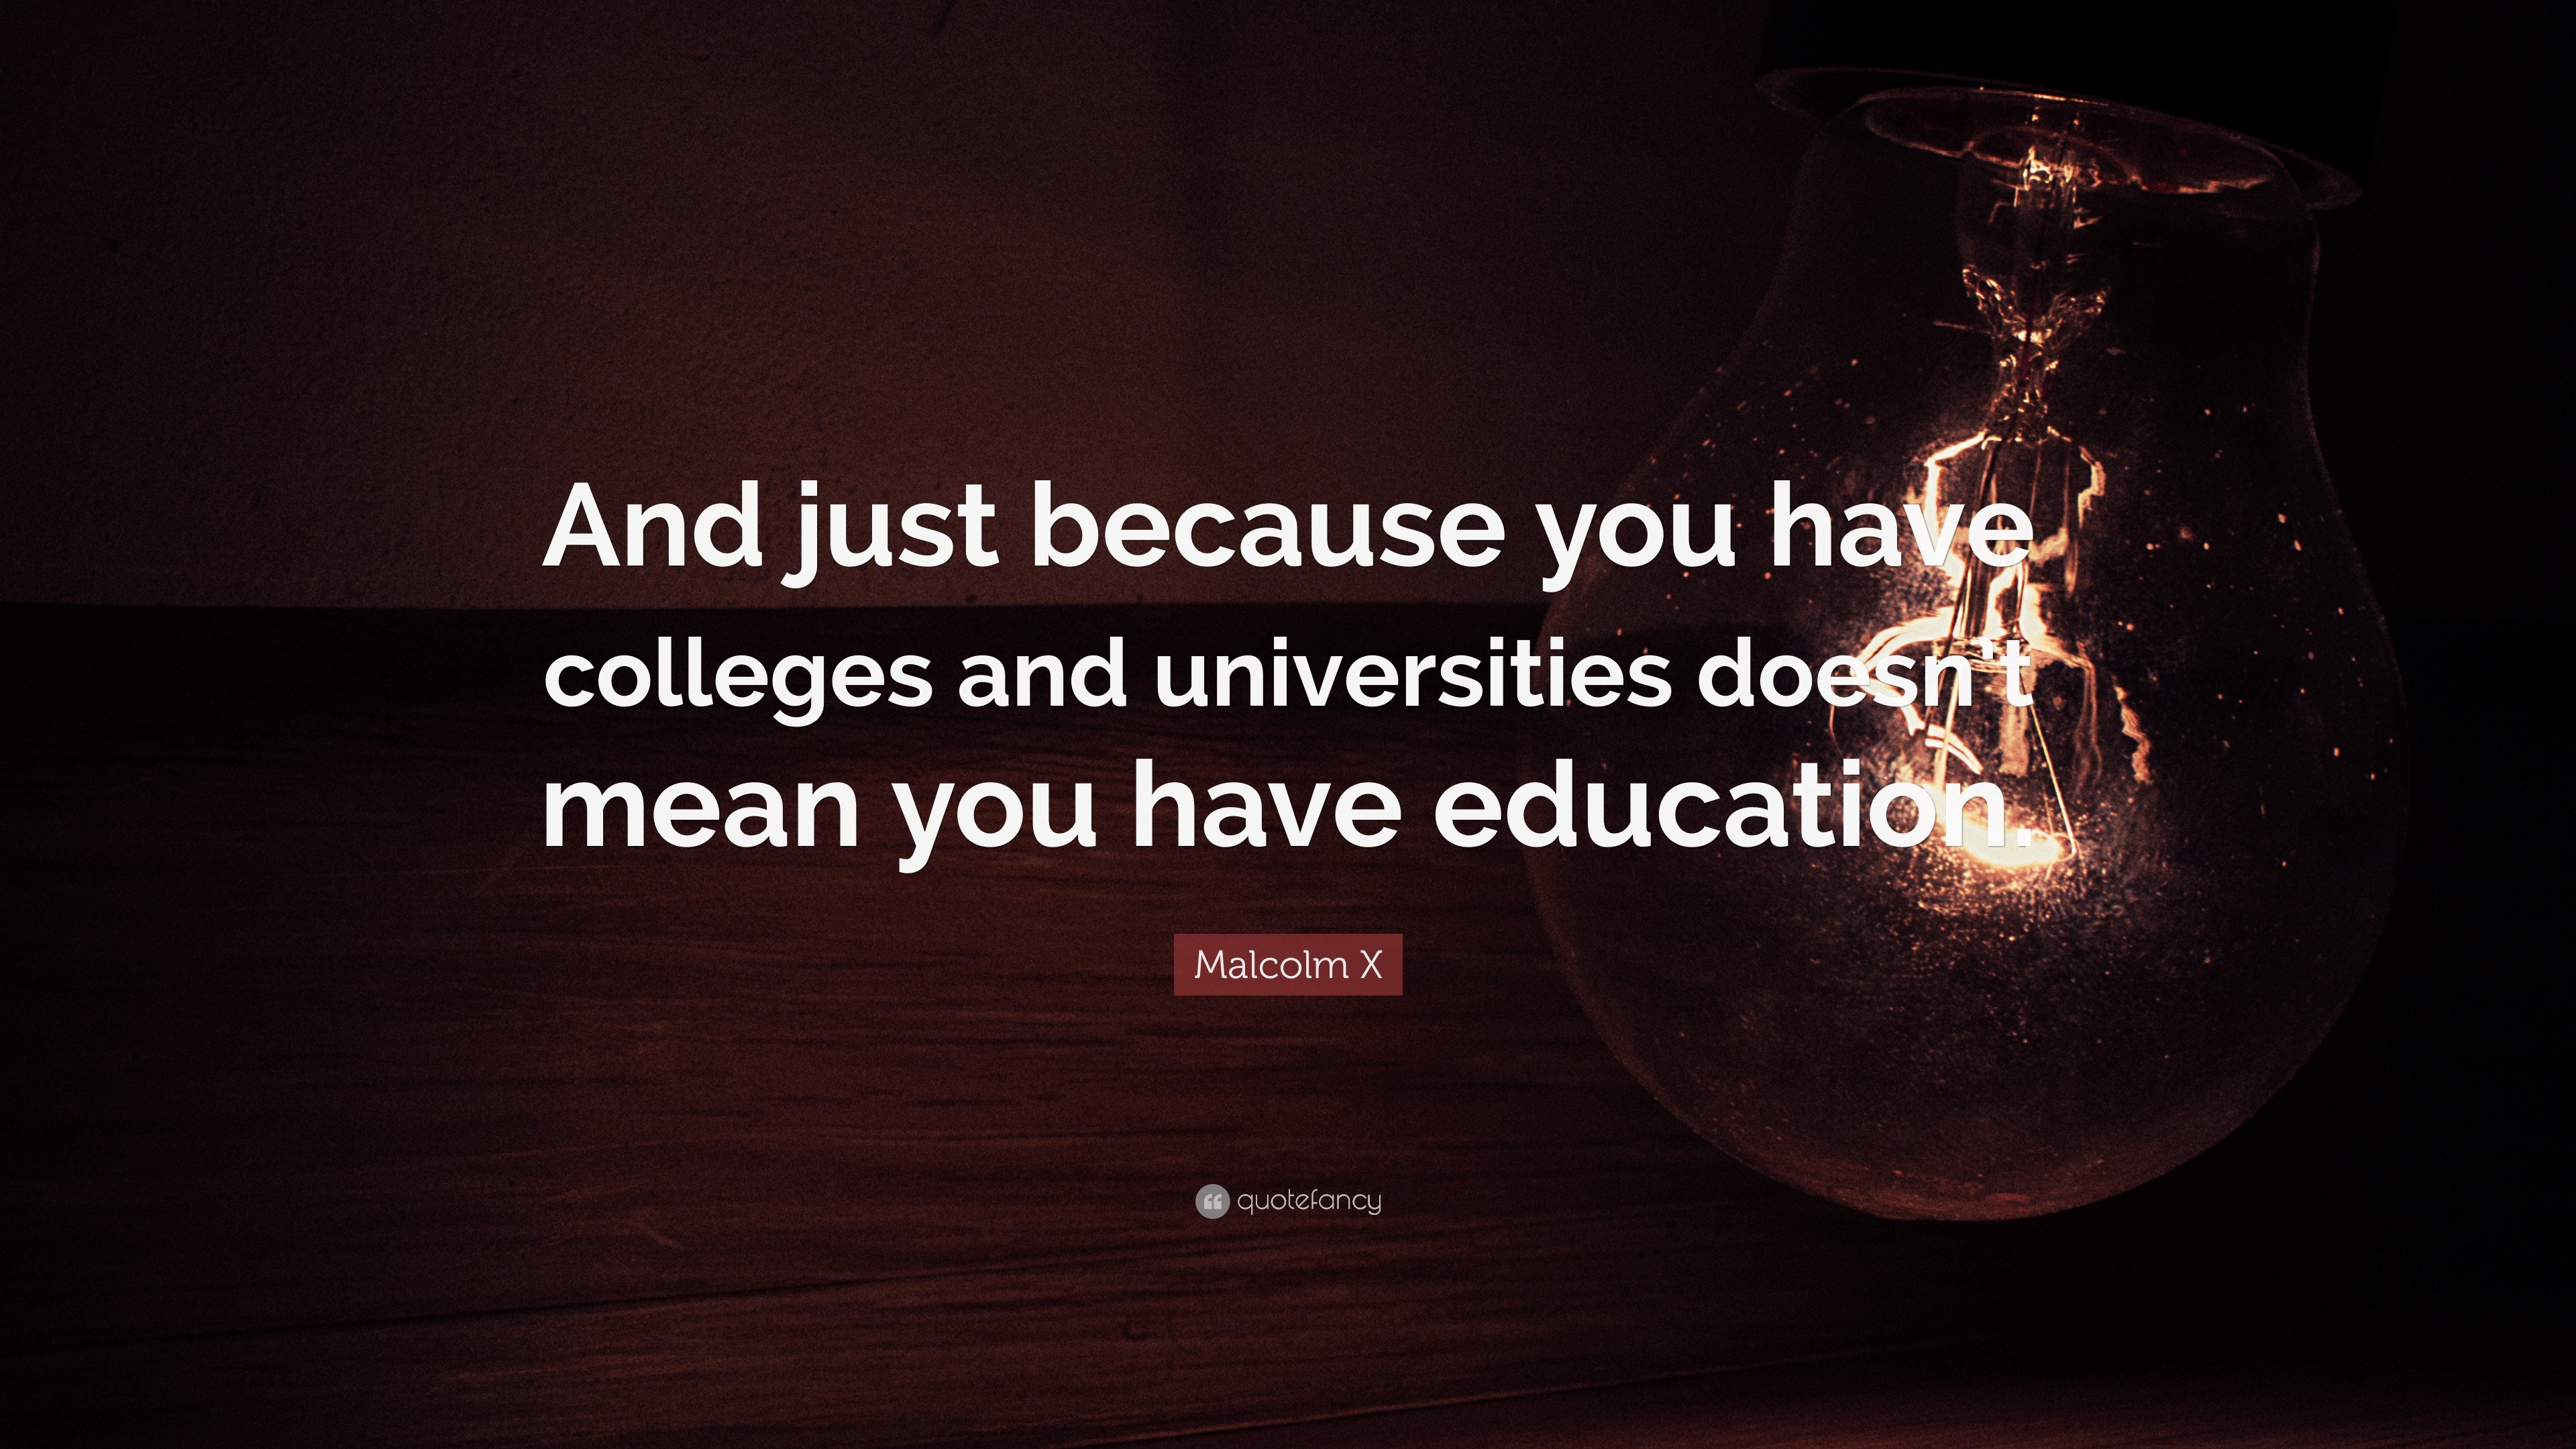 Malcolm X Quote: “And just because you have colleges and universities ...